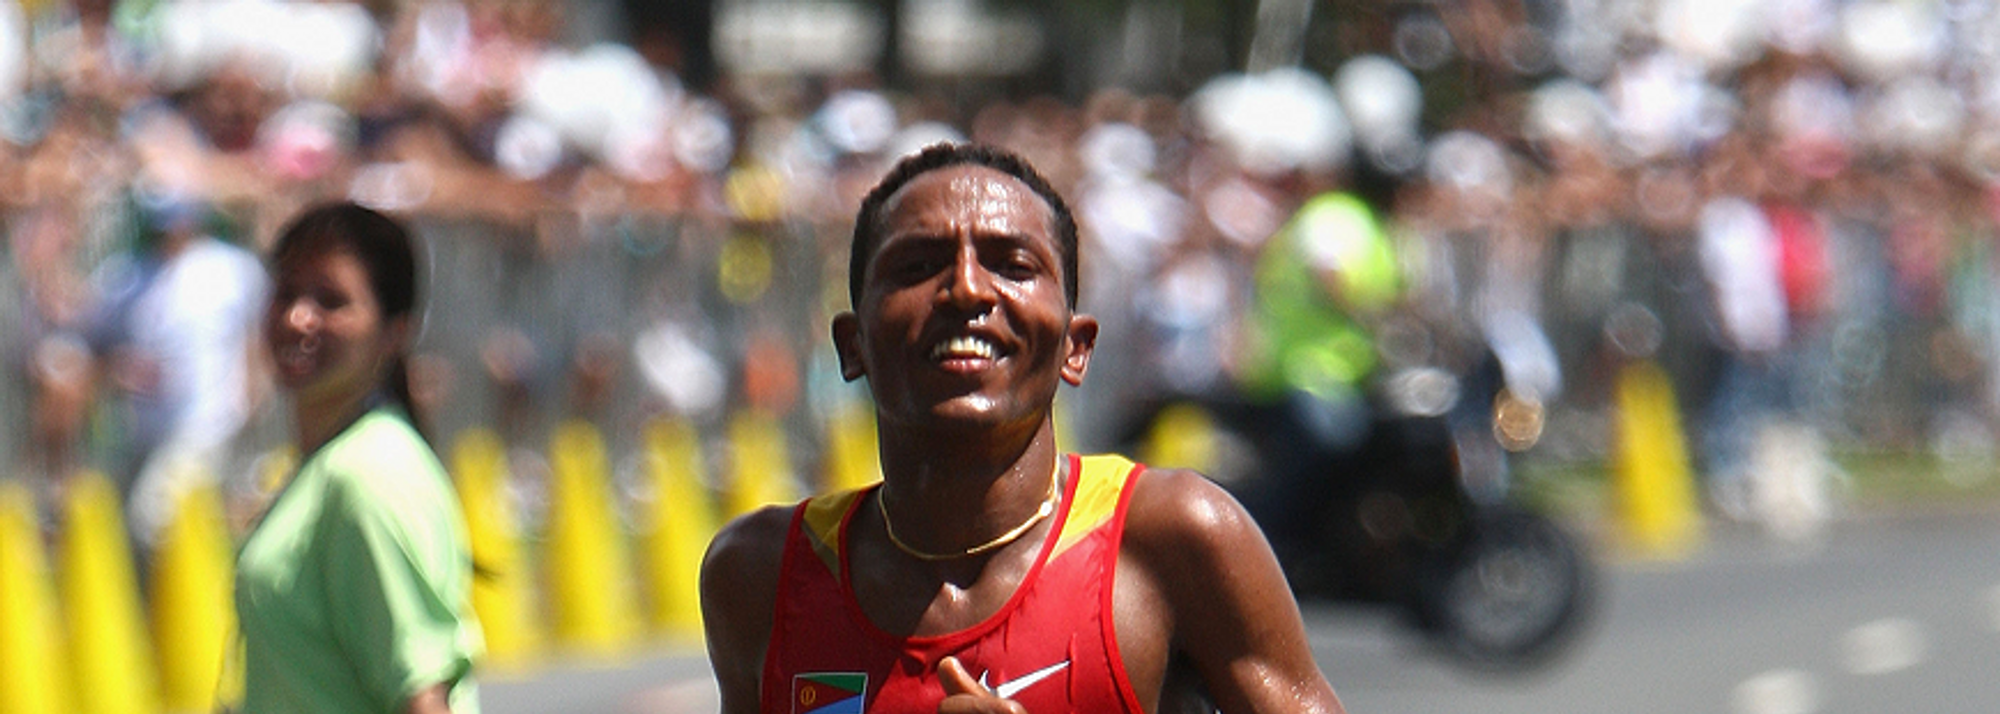 – Zersenay Tadese dominated today’s&nbsp; IAAF / CAIXA World Half Marathon Championships, taking a 21km stroll along the picturesque Atlantic coast of this ‘Marvellous City’ renowned internationally more for its slightly clad sunbathing beauties than athletics brilliance.</P>